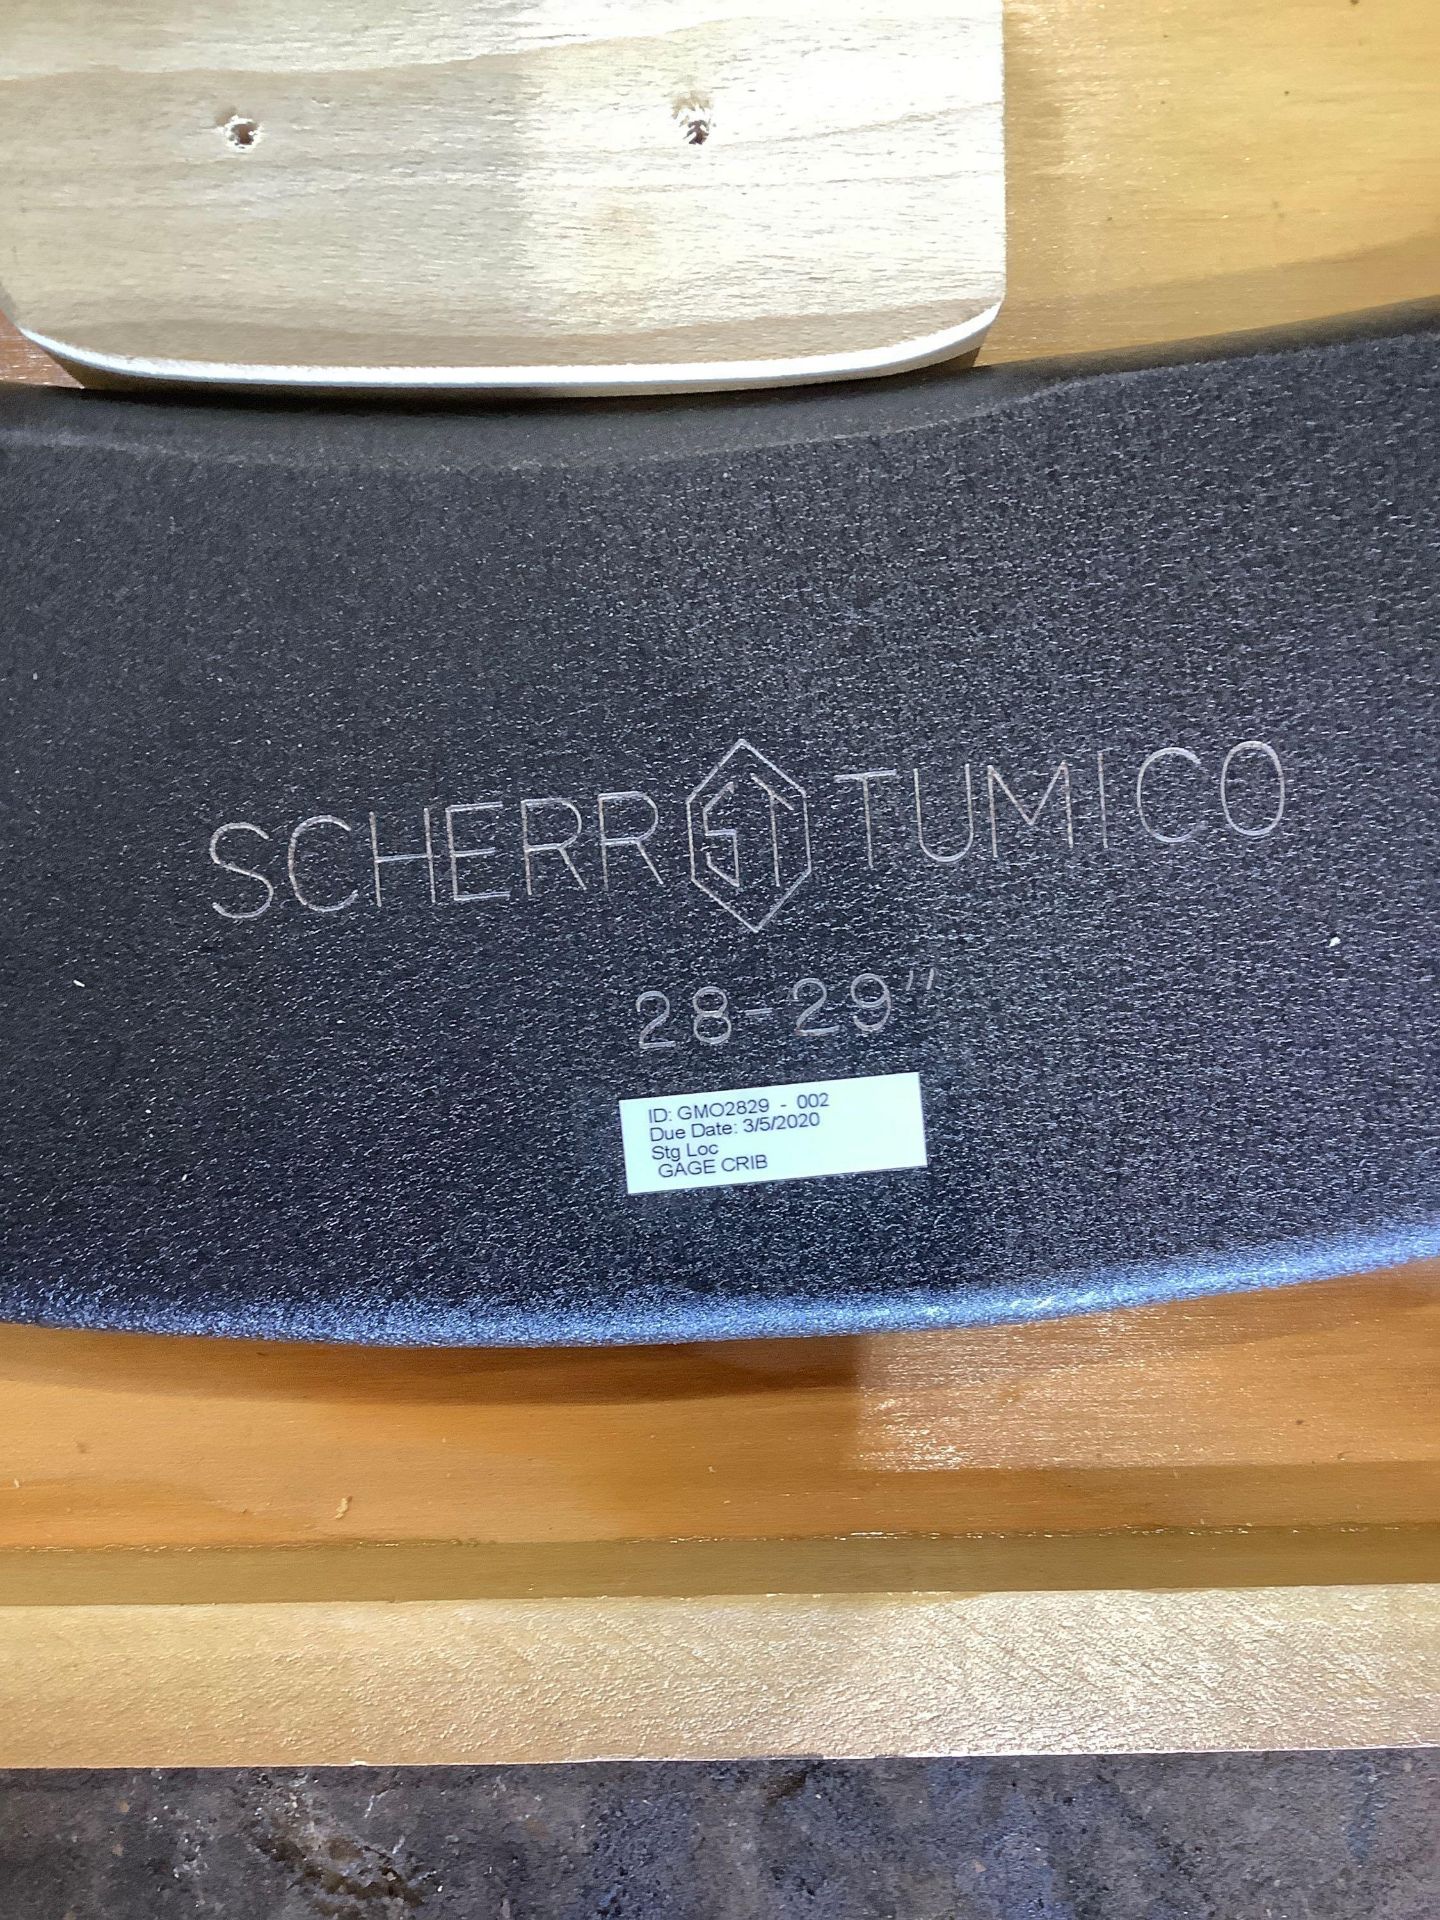 Scherr-Tumico O.D. Micrometer 28" to 29" - Image 2 of 3